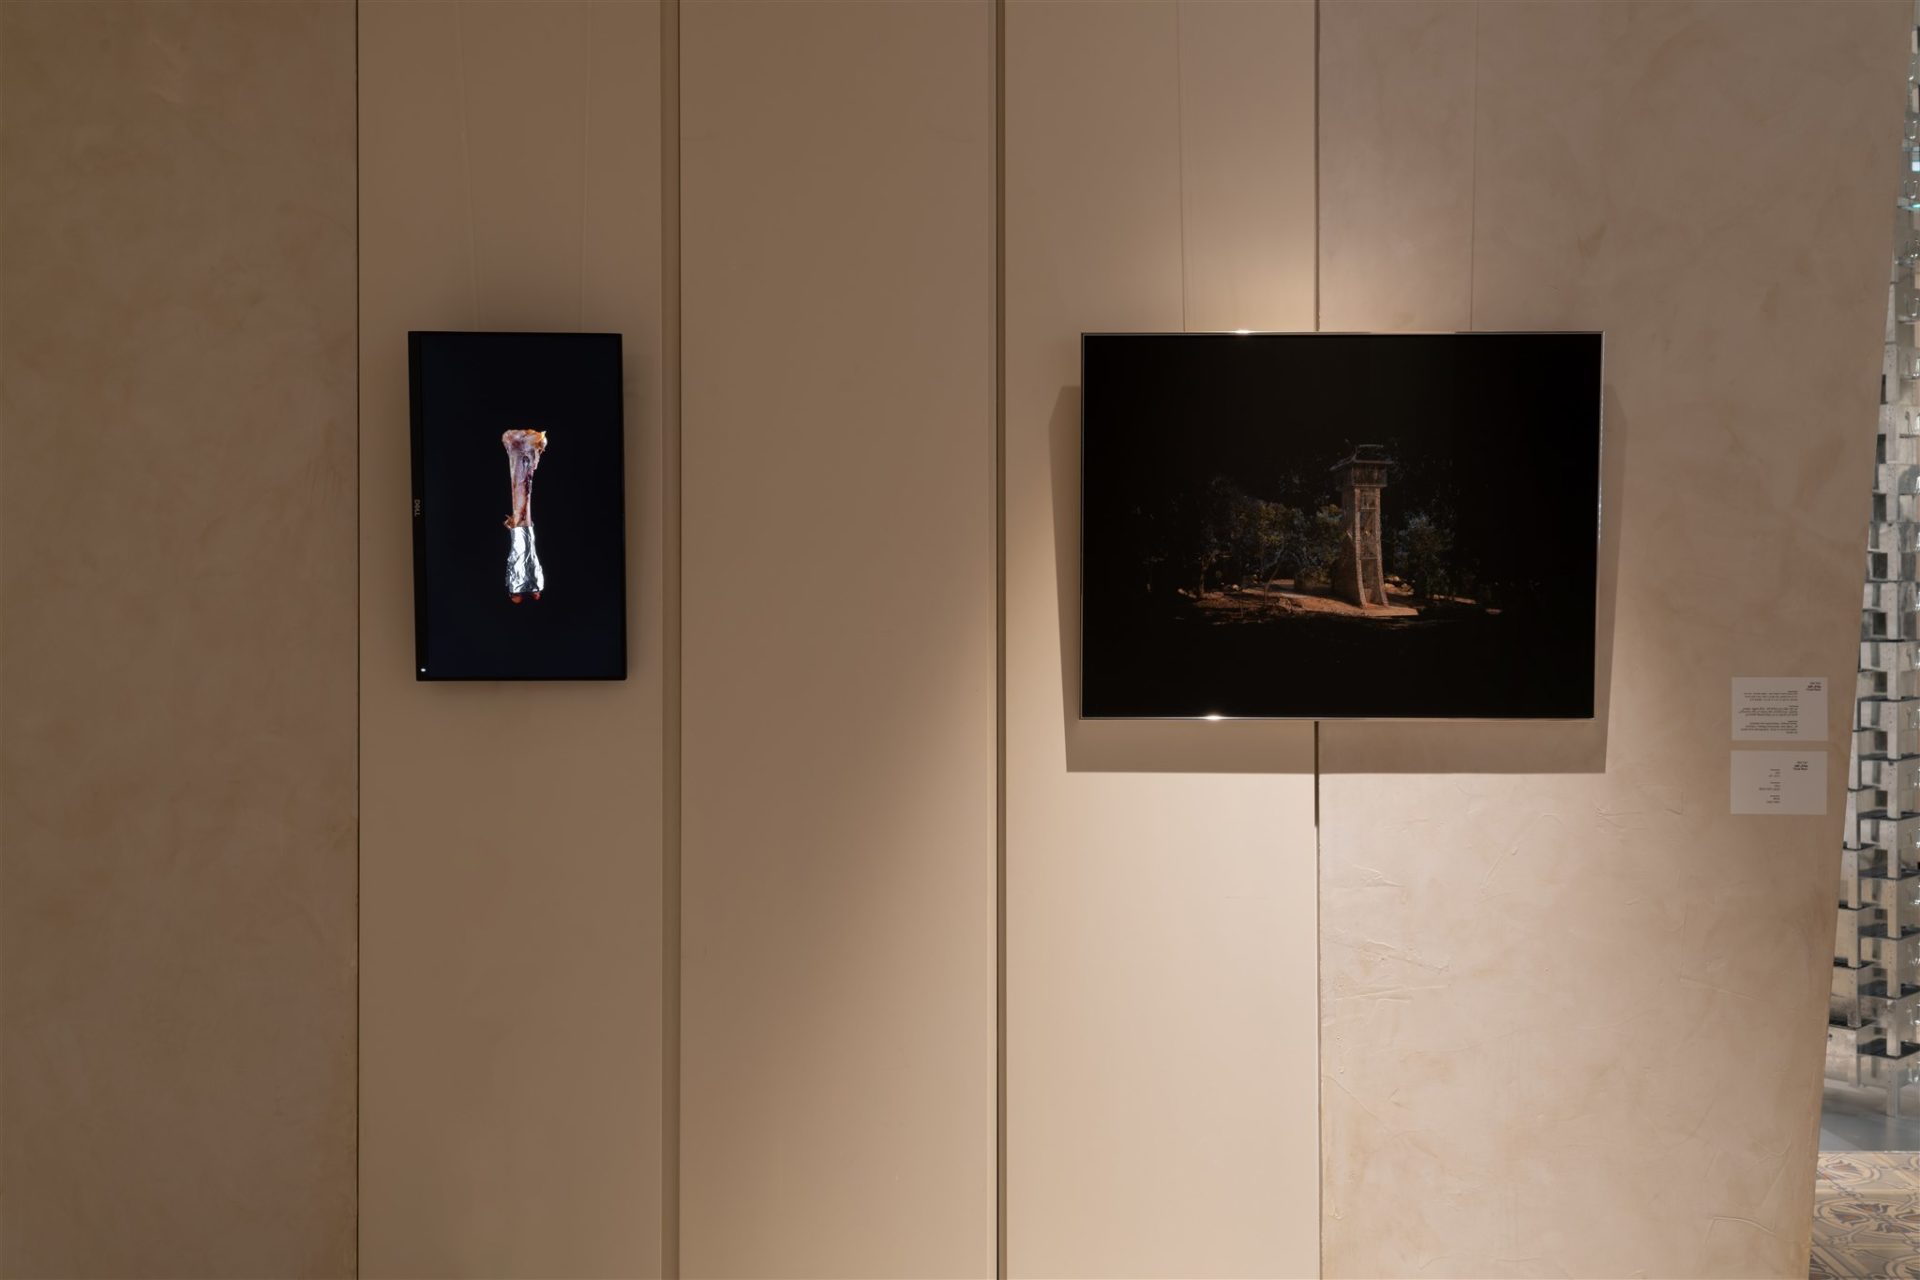 Yuval Naor<br />
On the right: Untitled (Fire watchtower, Ahihud Forest. Architect: Yedidya Eisenstadt, late 1960s), 3D model from photographs. Inkjet on archival paper. 60x80 cm<br />
On the left: Bone, Loop video<br />
Photography: Michael Tzur